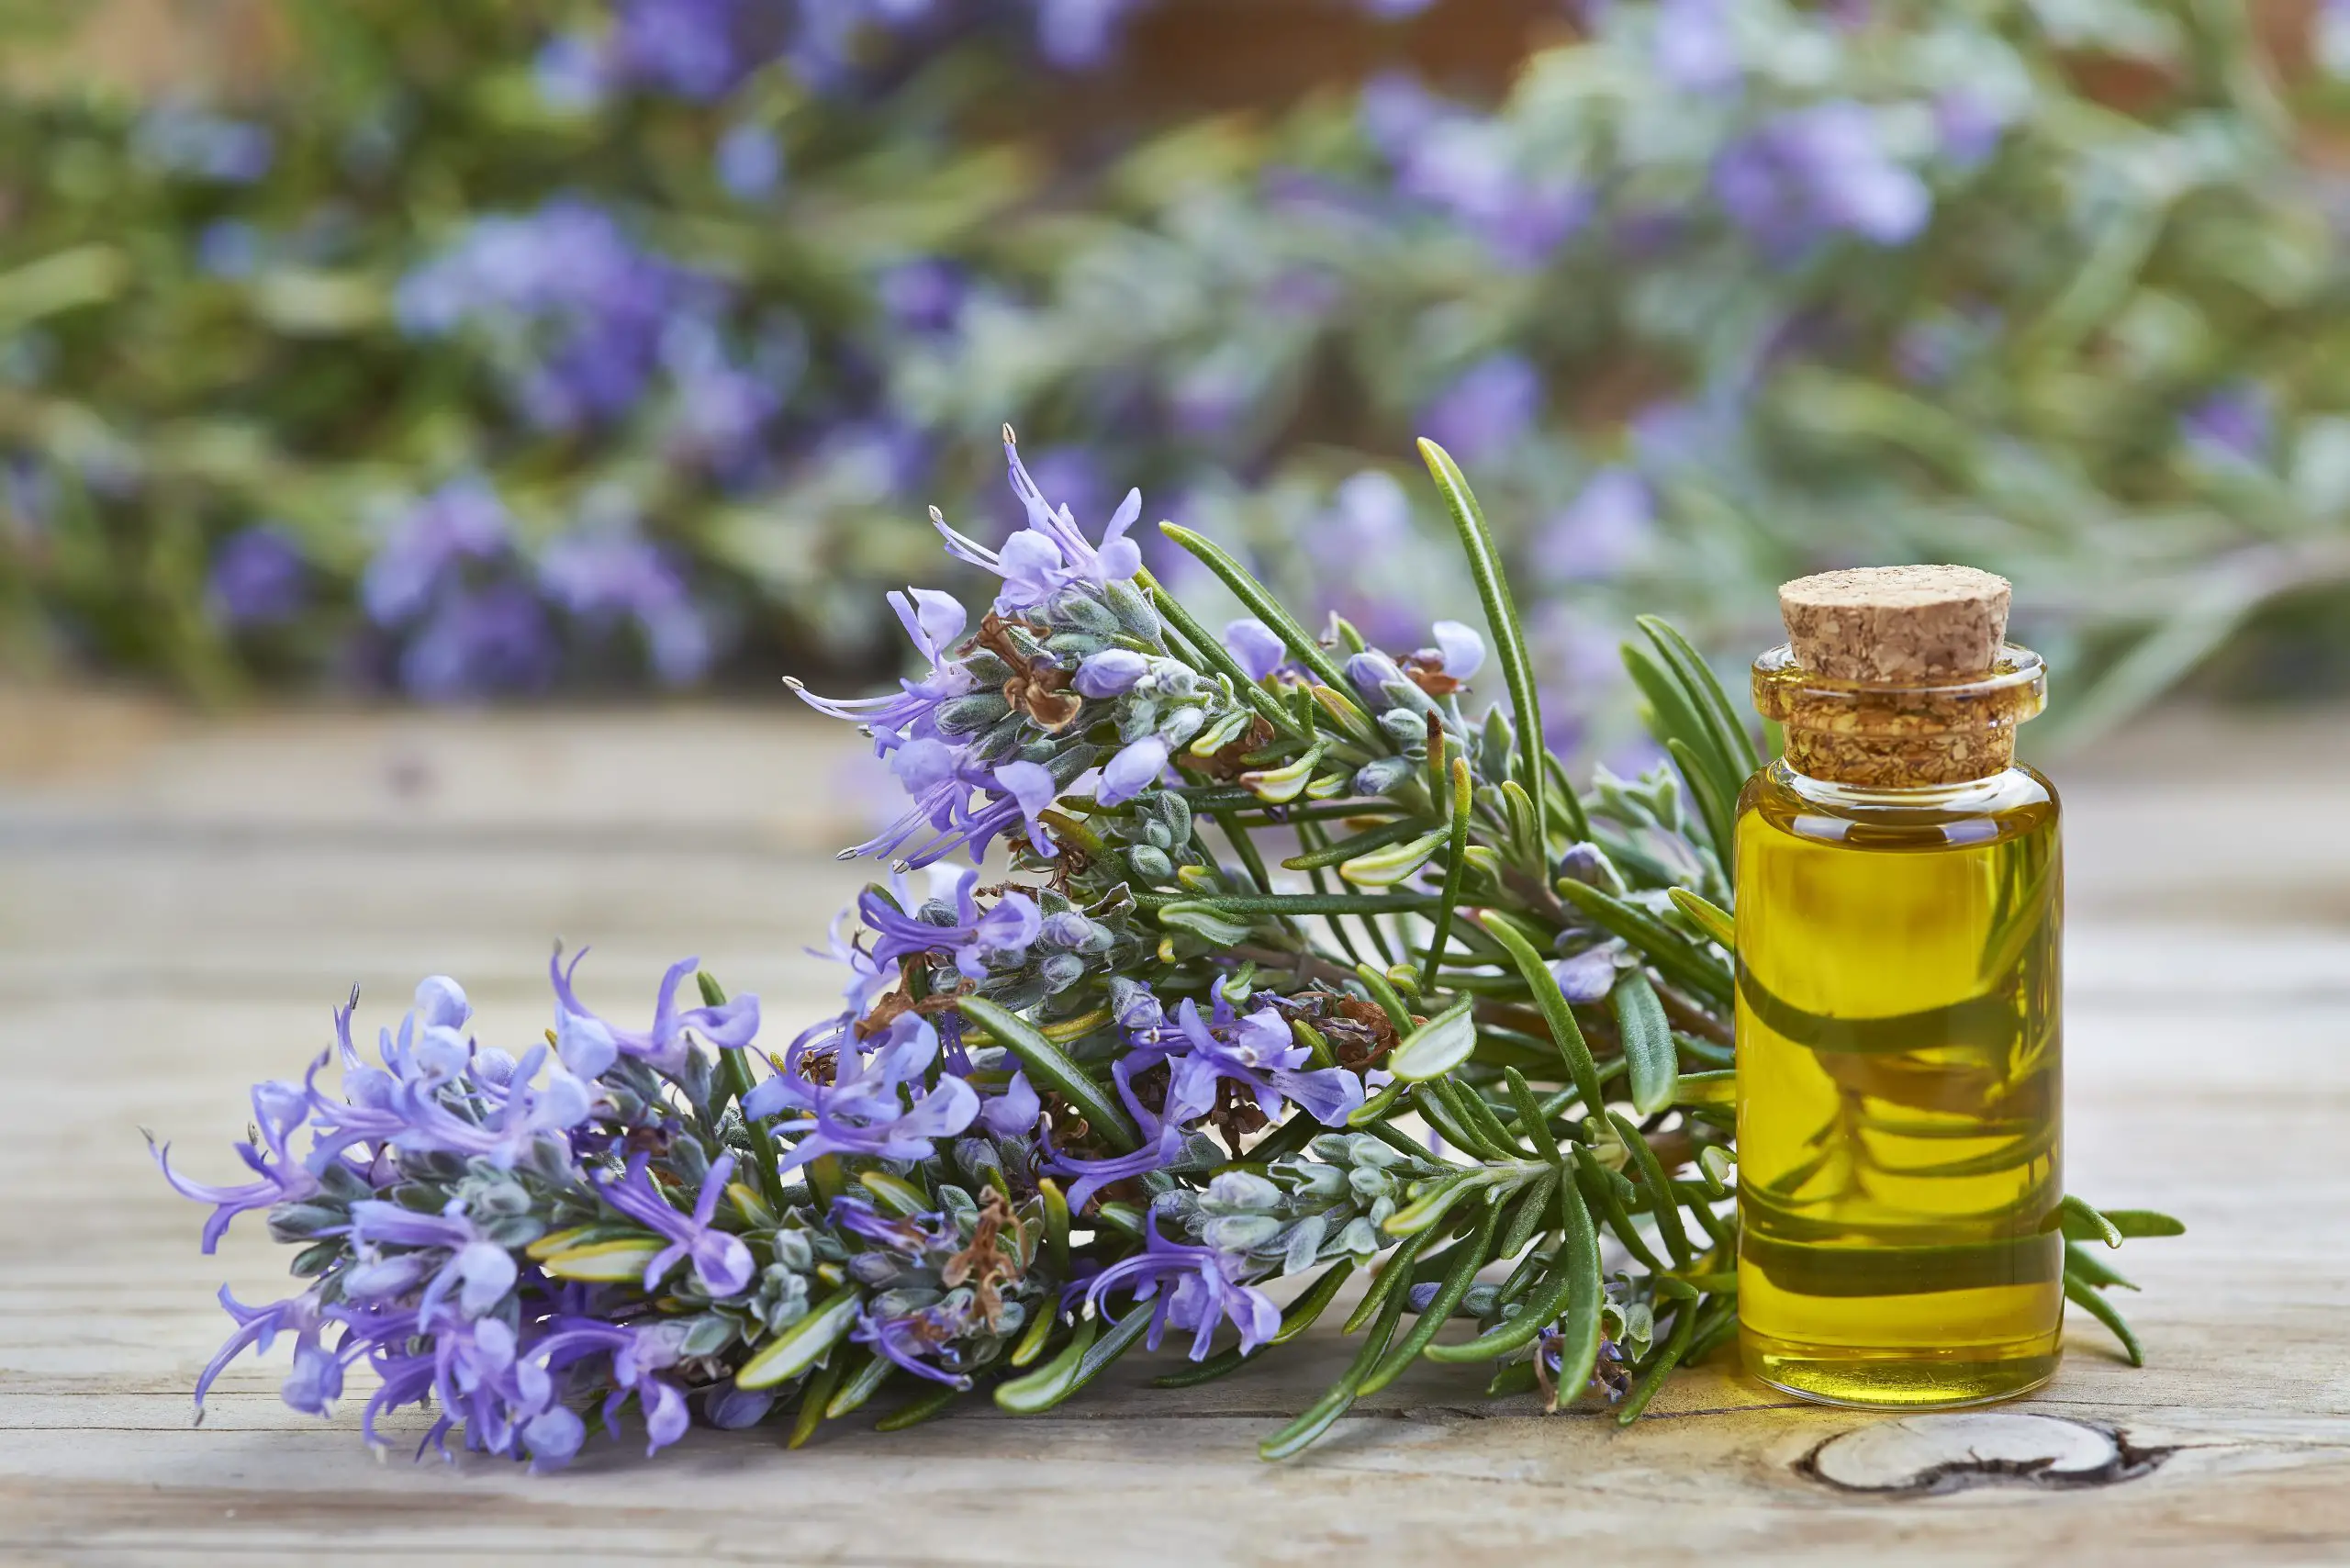 Rosemary Oil for Hair Growth: Does it Work?